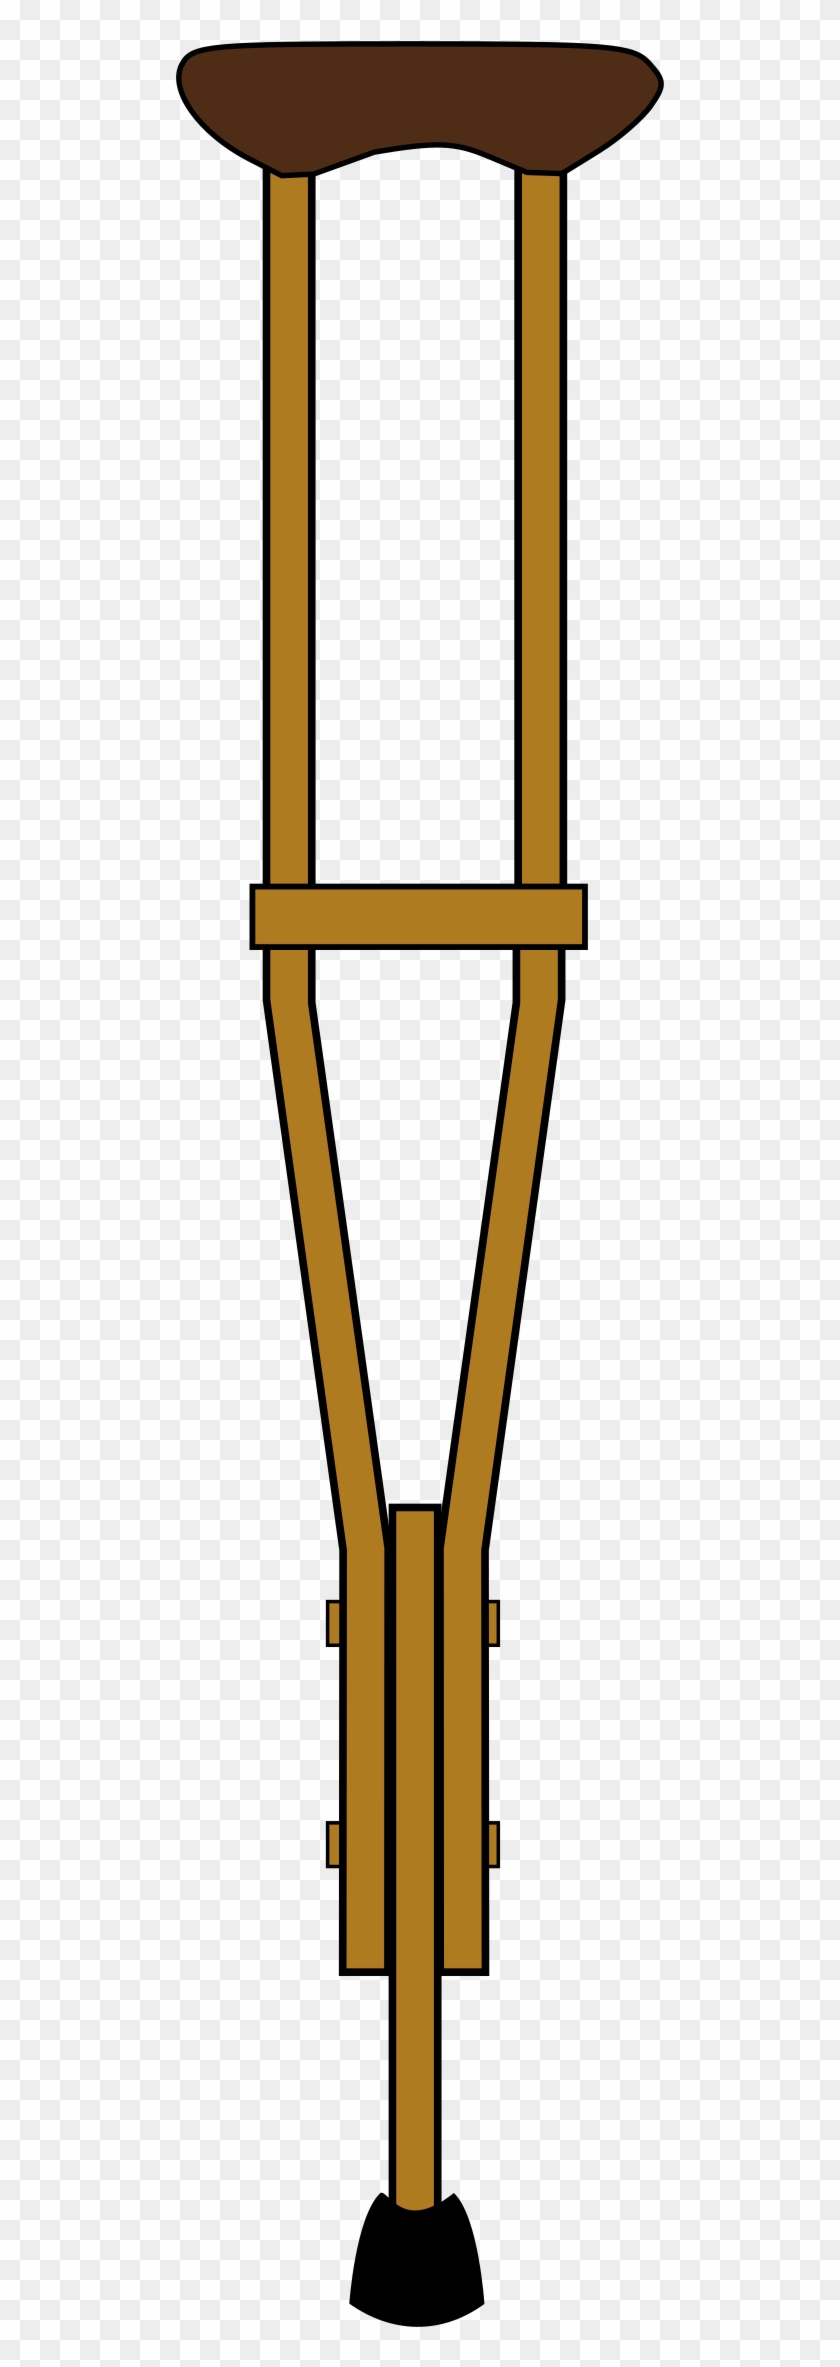 We Do Our Best To Bring You The Highest Quality Crutches - Crutches Clipart Transpare...